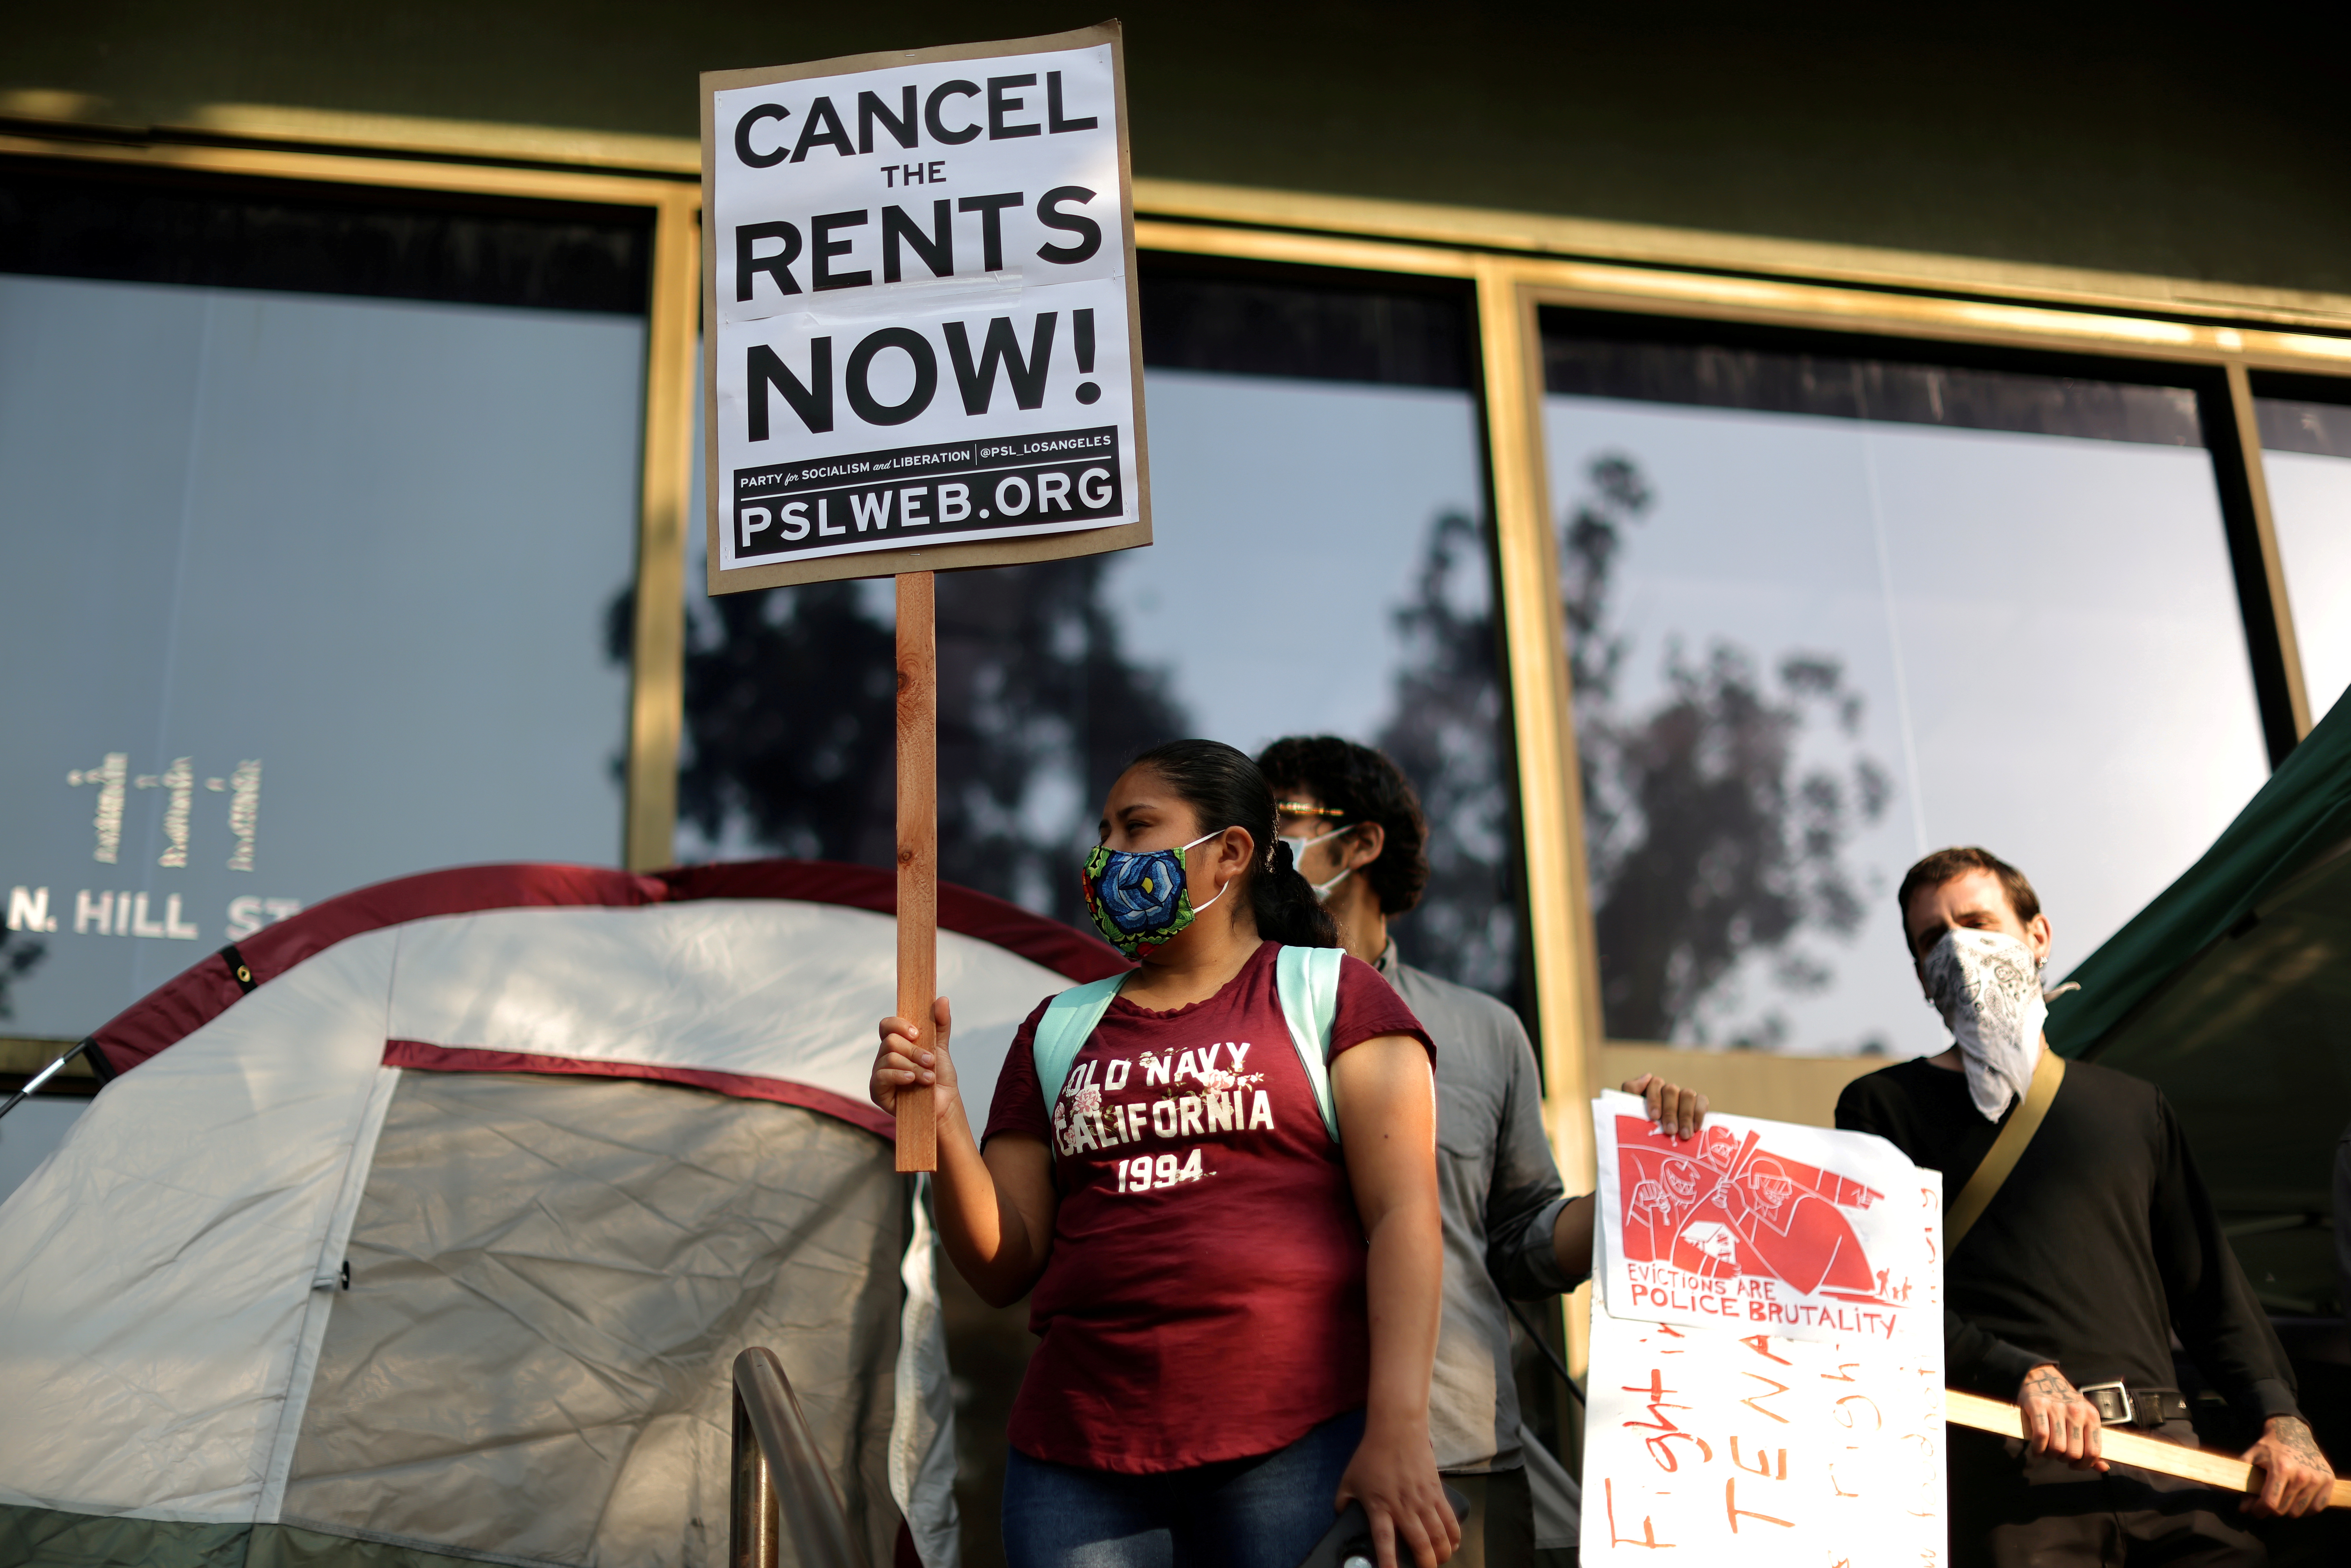 Protesters surround the LA Superior Court to prevent an upcoming wave of evictions and call on Governor Gavin Newsom to pass an eviction moratorium, amid the global outbreak of coronavirus disease (COVID-19), in Los Angeles